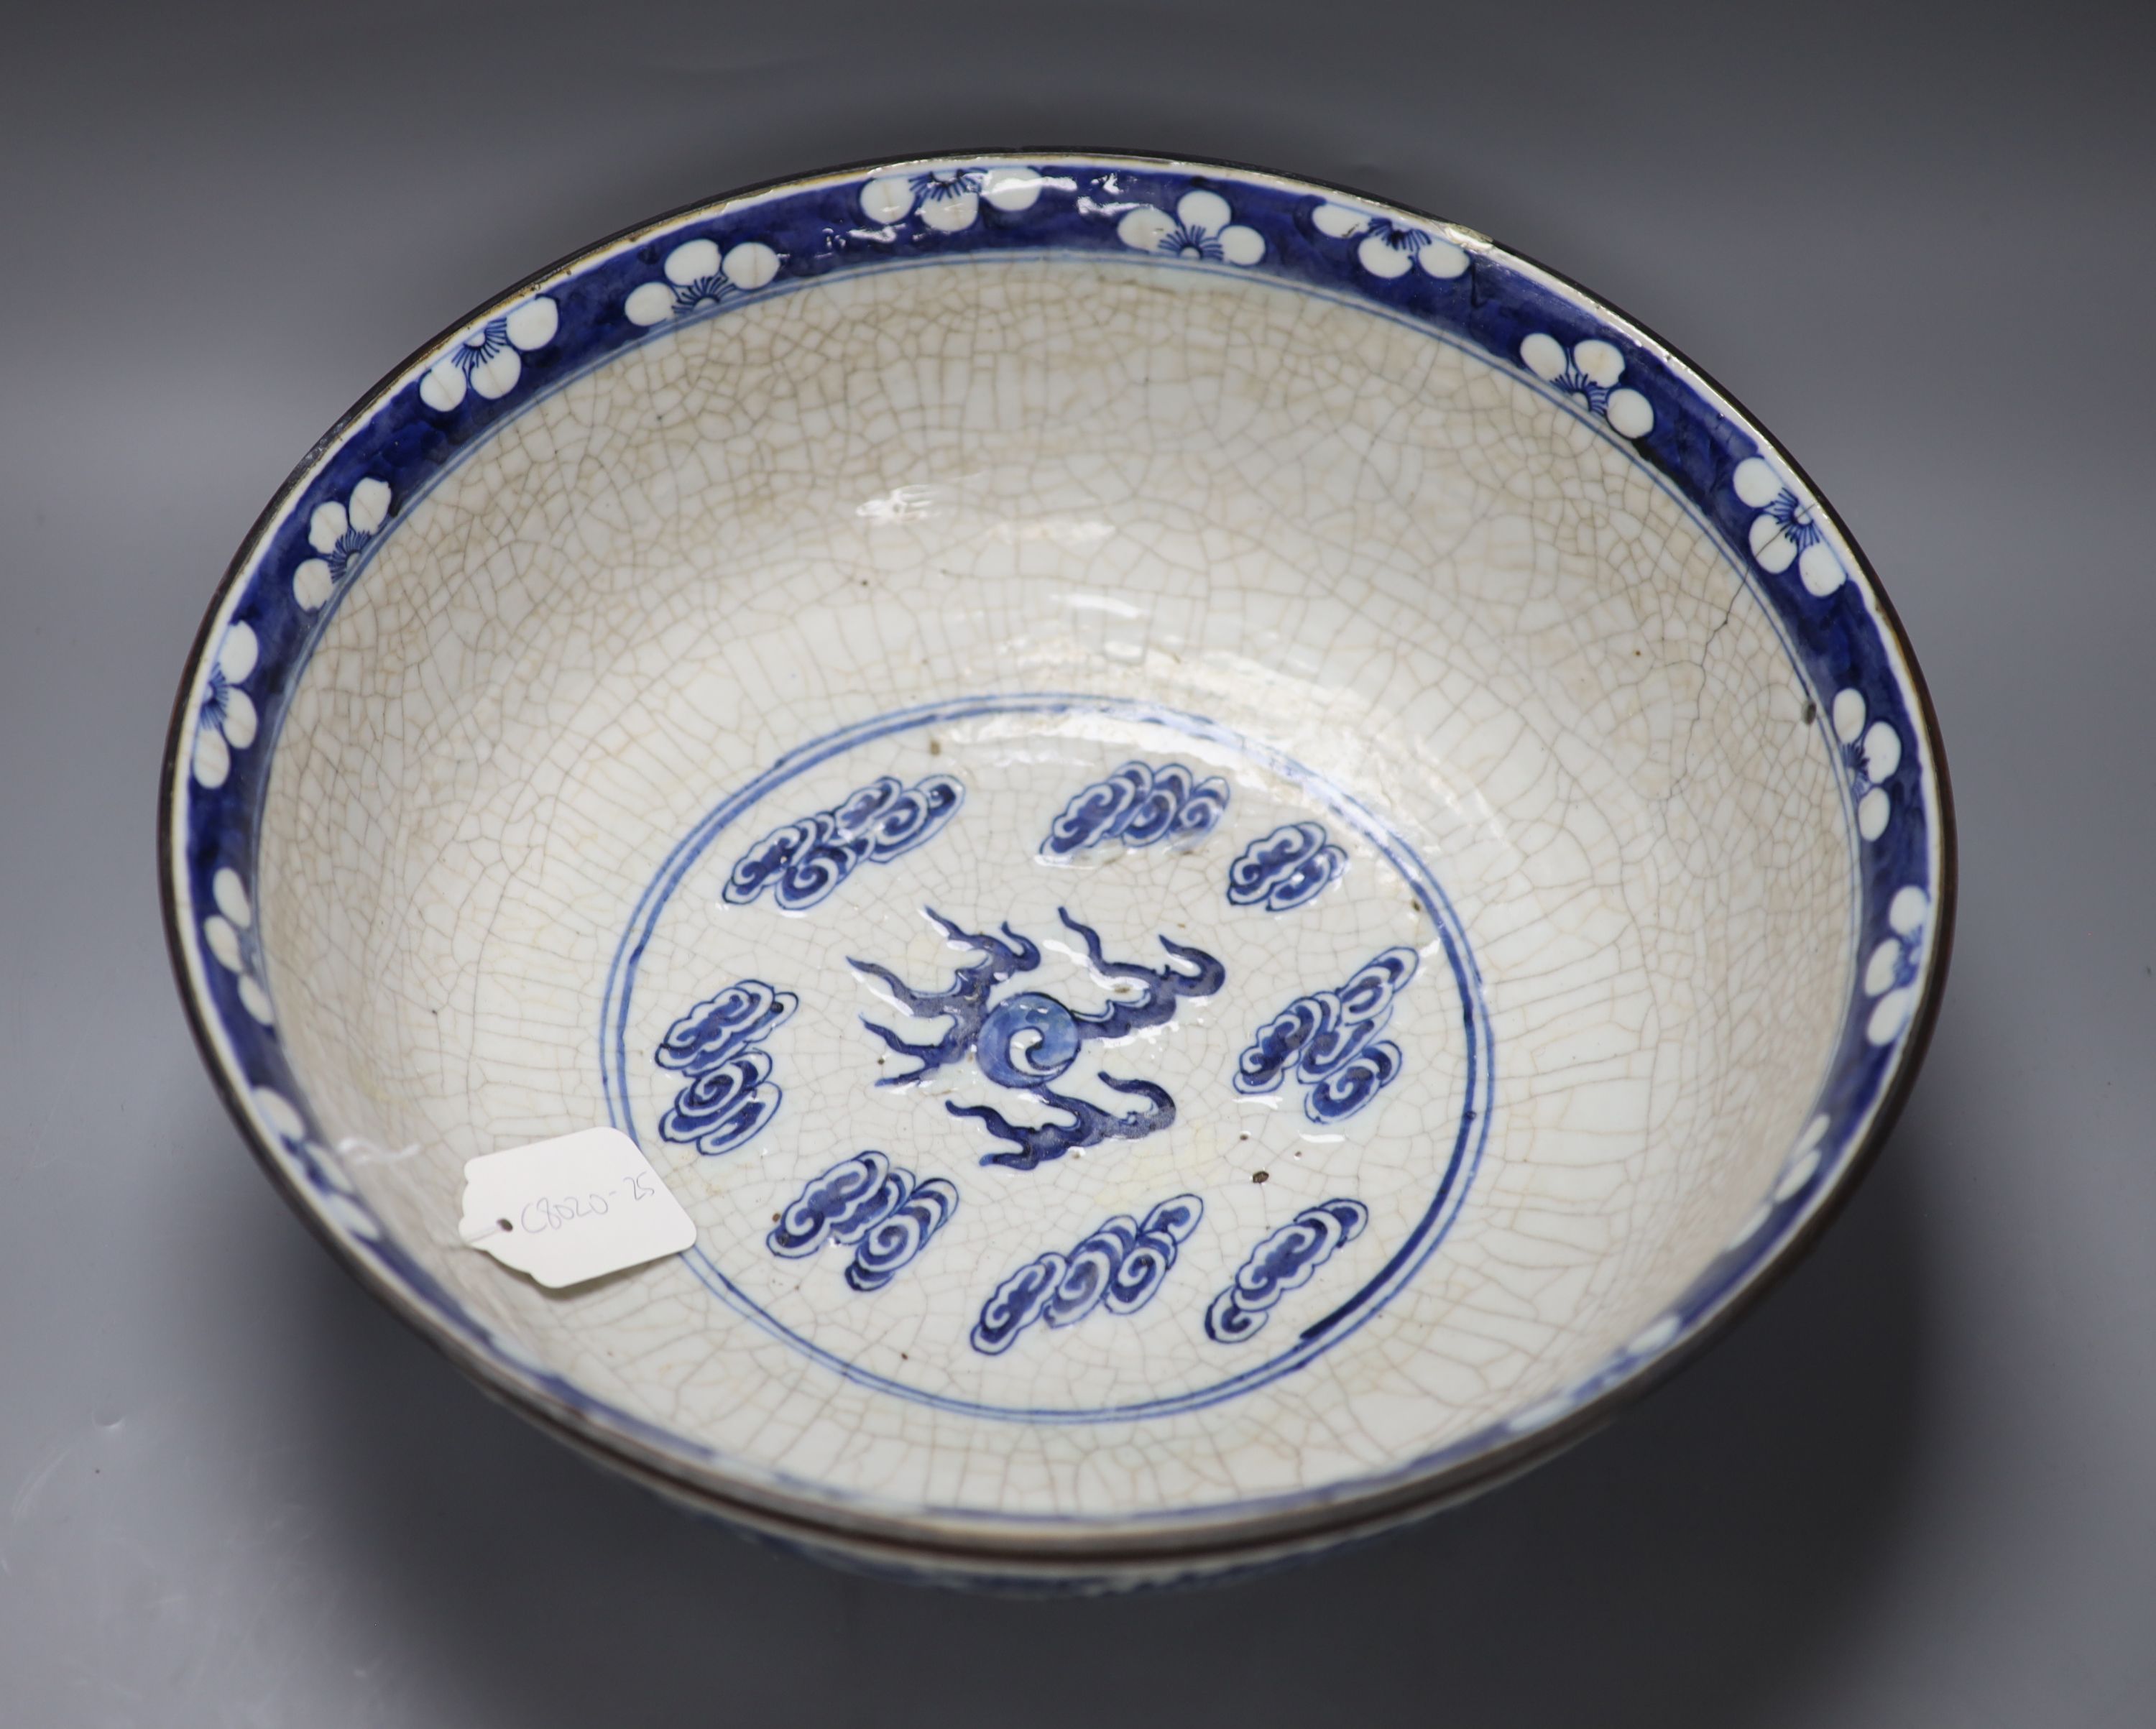 A large Chinese blue and white crackle glazed dragon bowl, 19th century, diameter 37cm